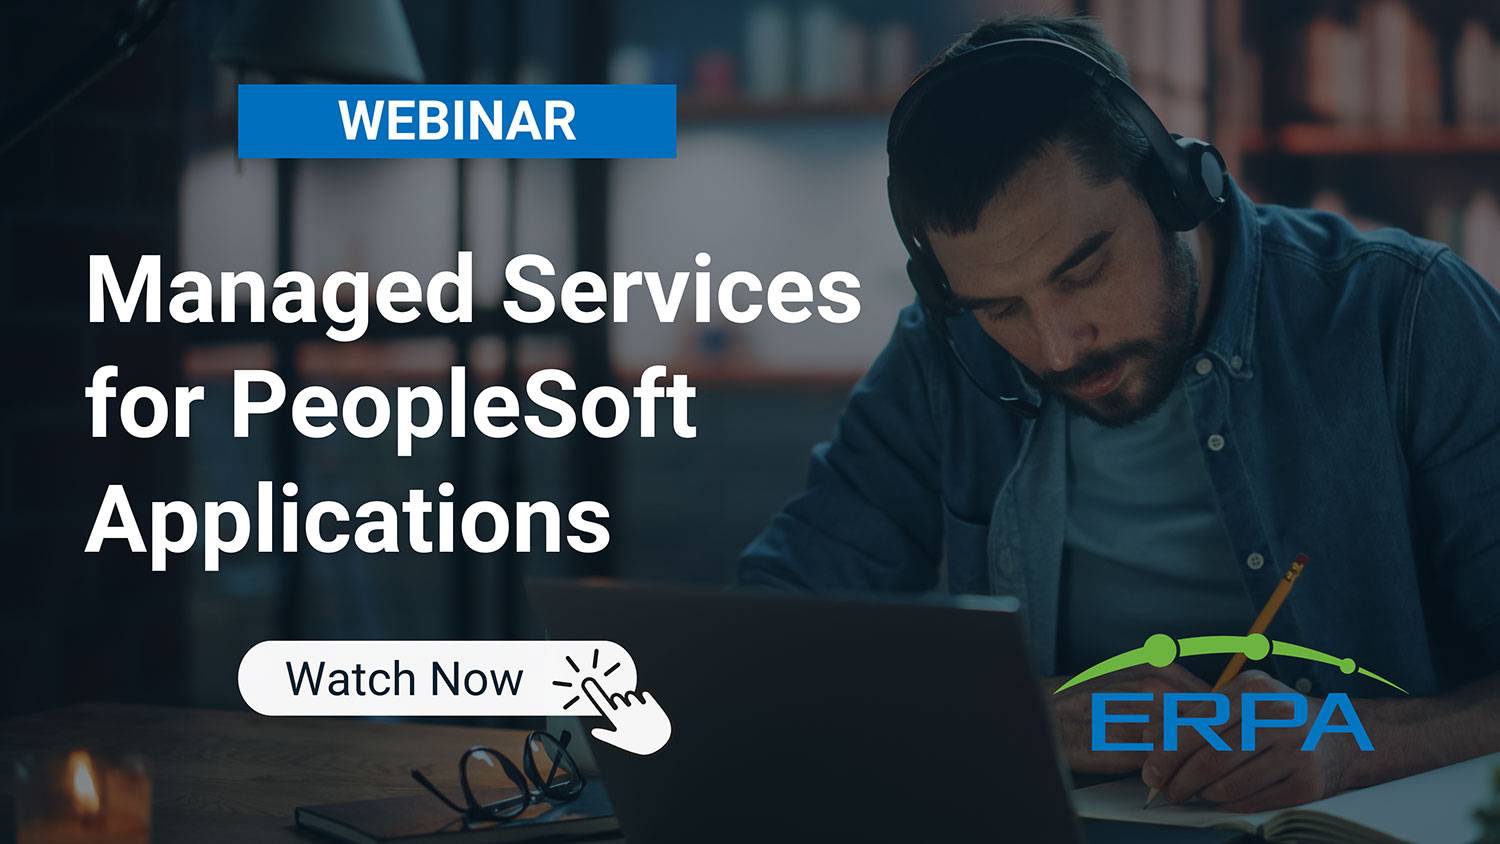 ERPA Webinar: Managed Services for PeopleSoft Applications